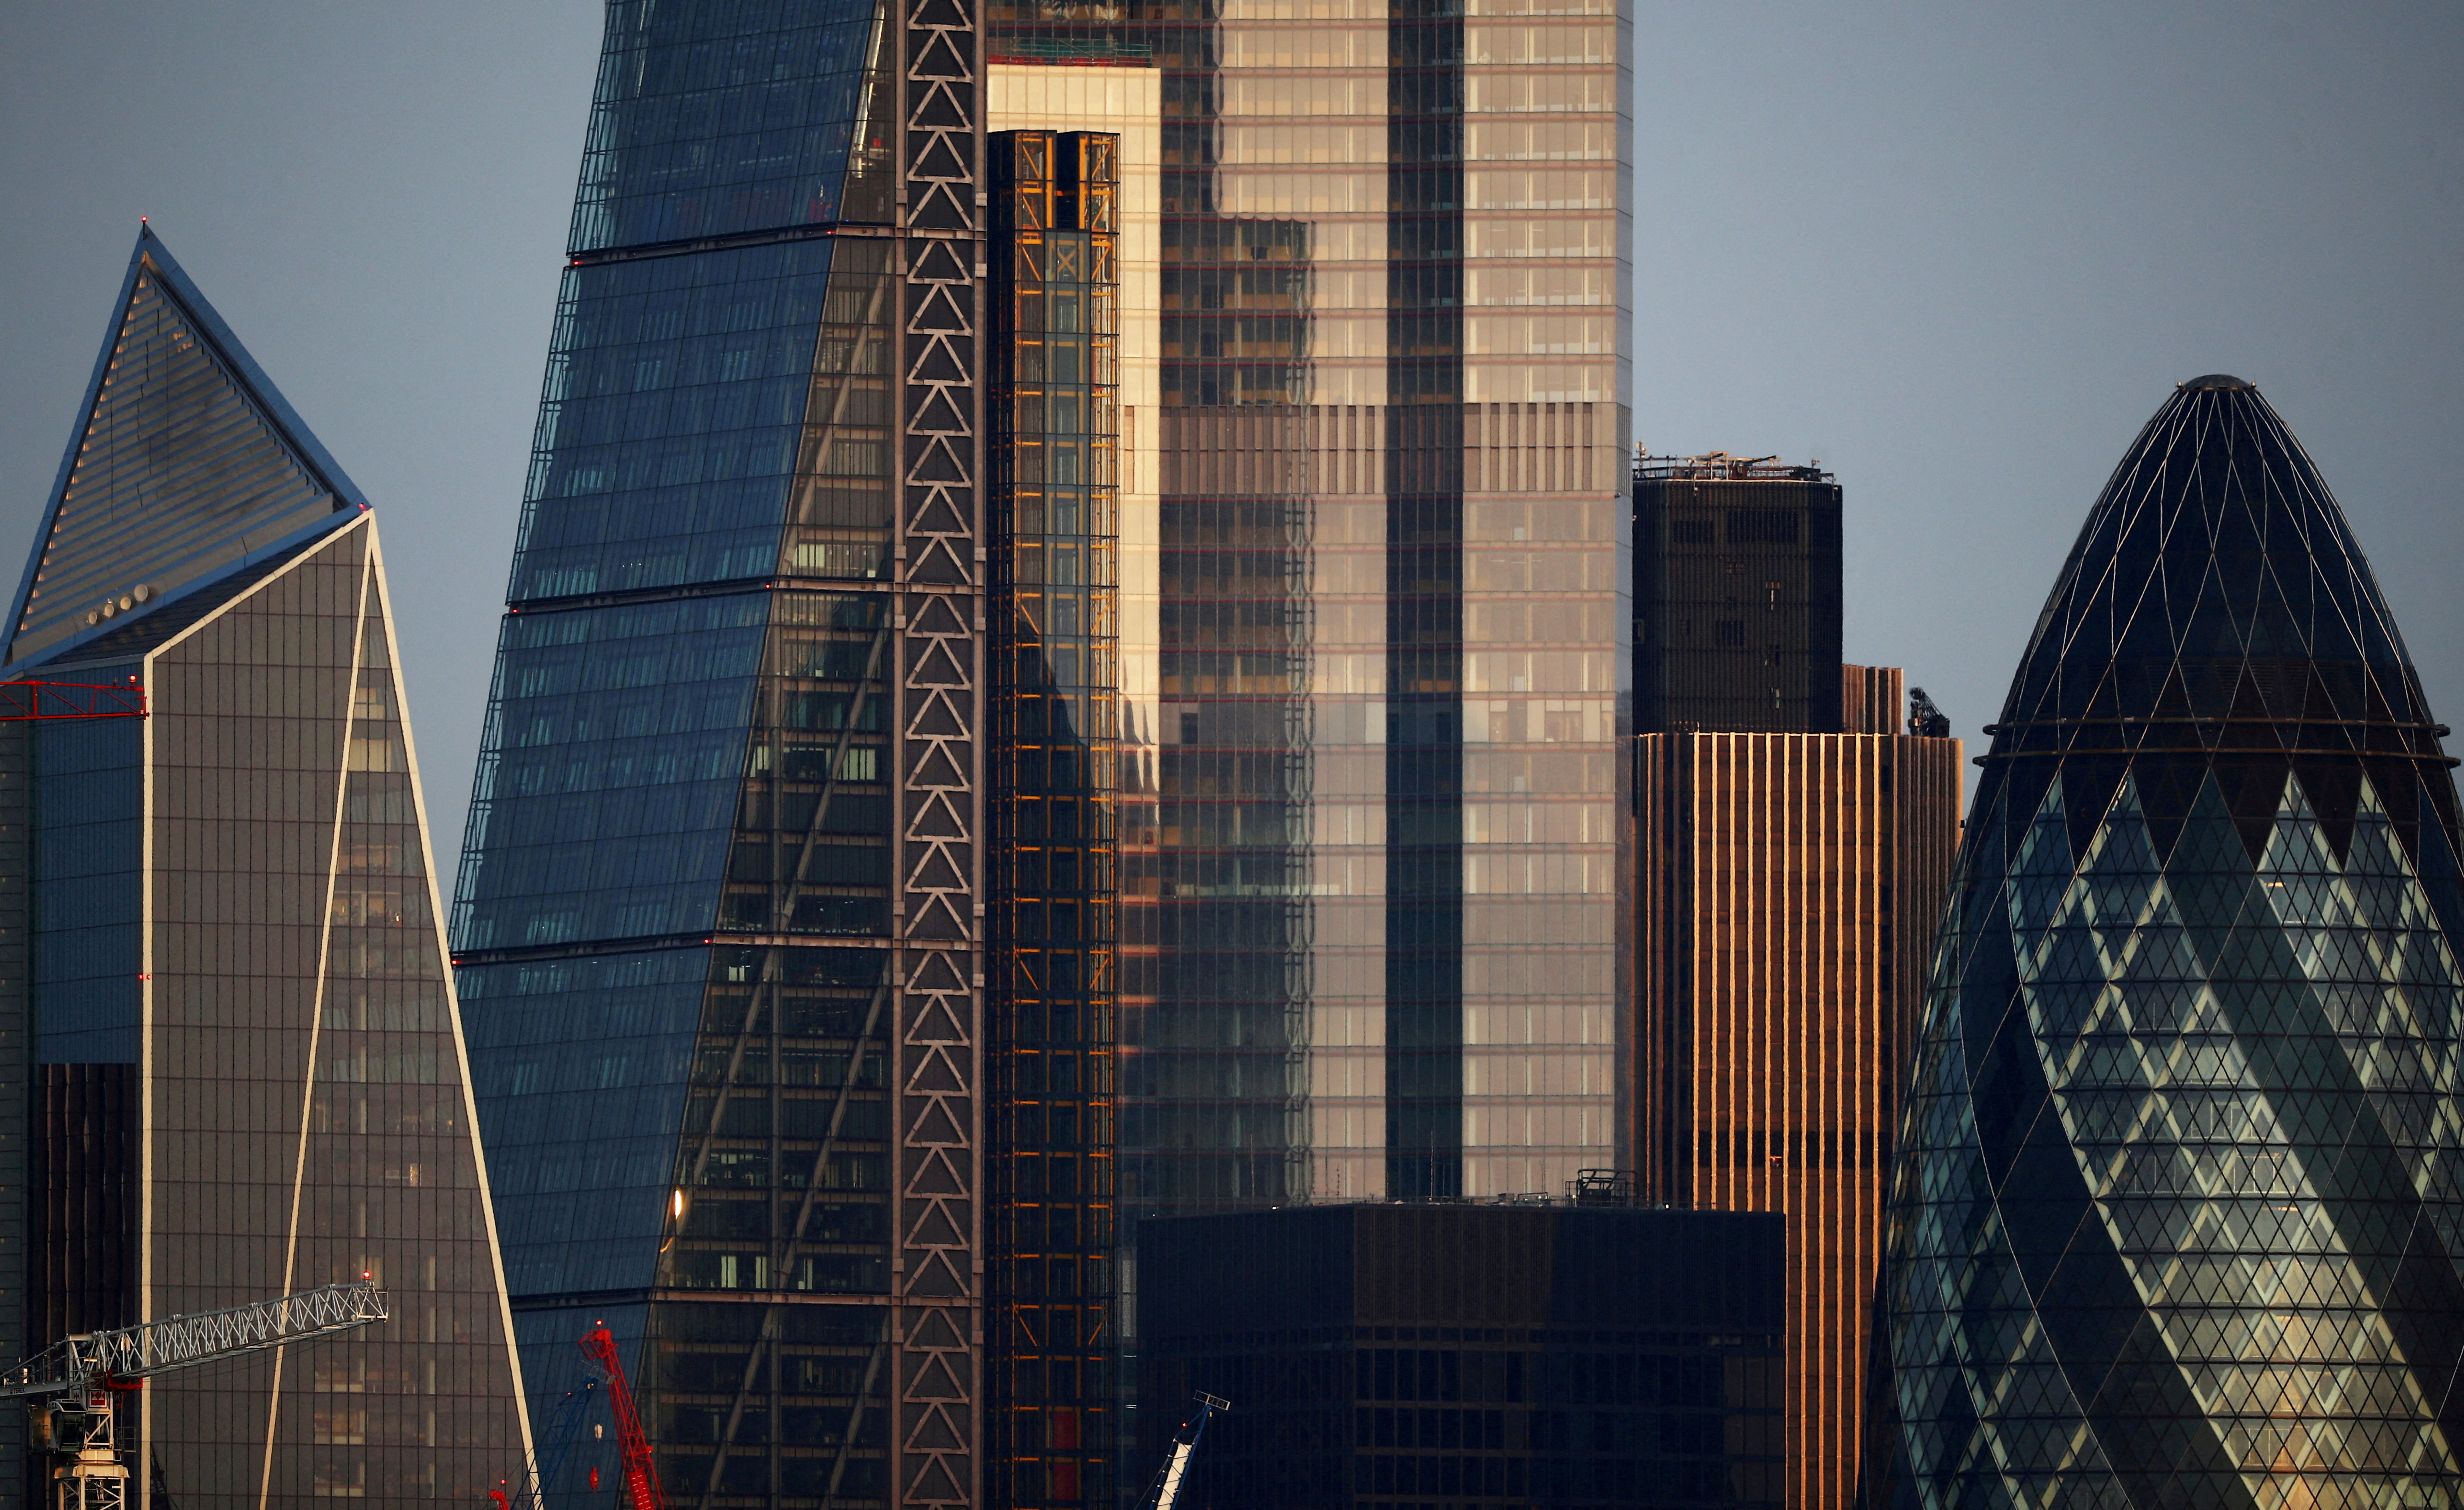 mFILE PHOTO: Skyscrapers in The City of London financial district are seen in London